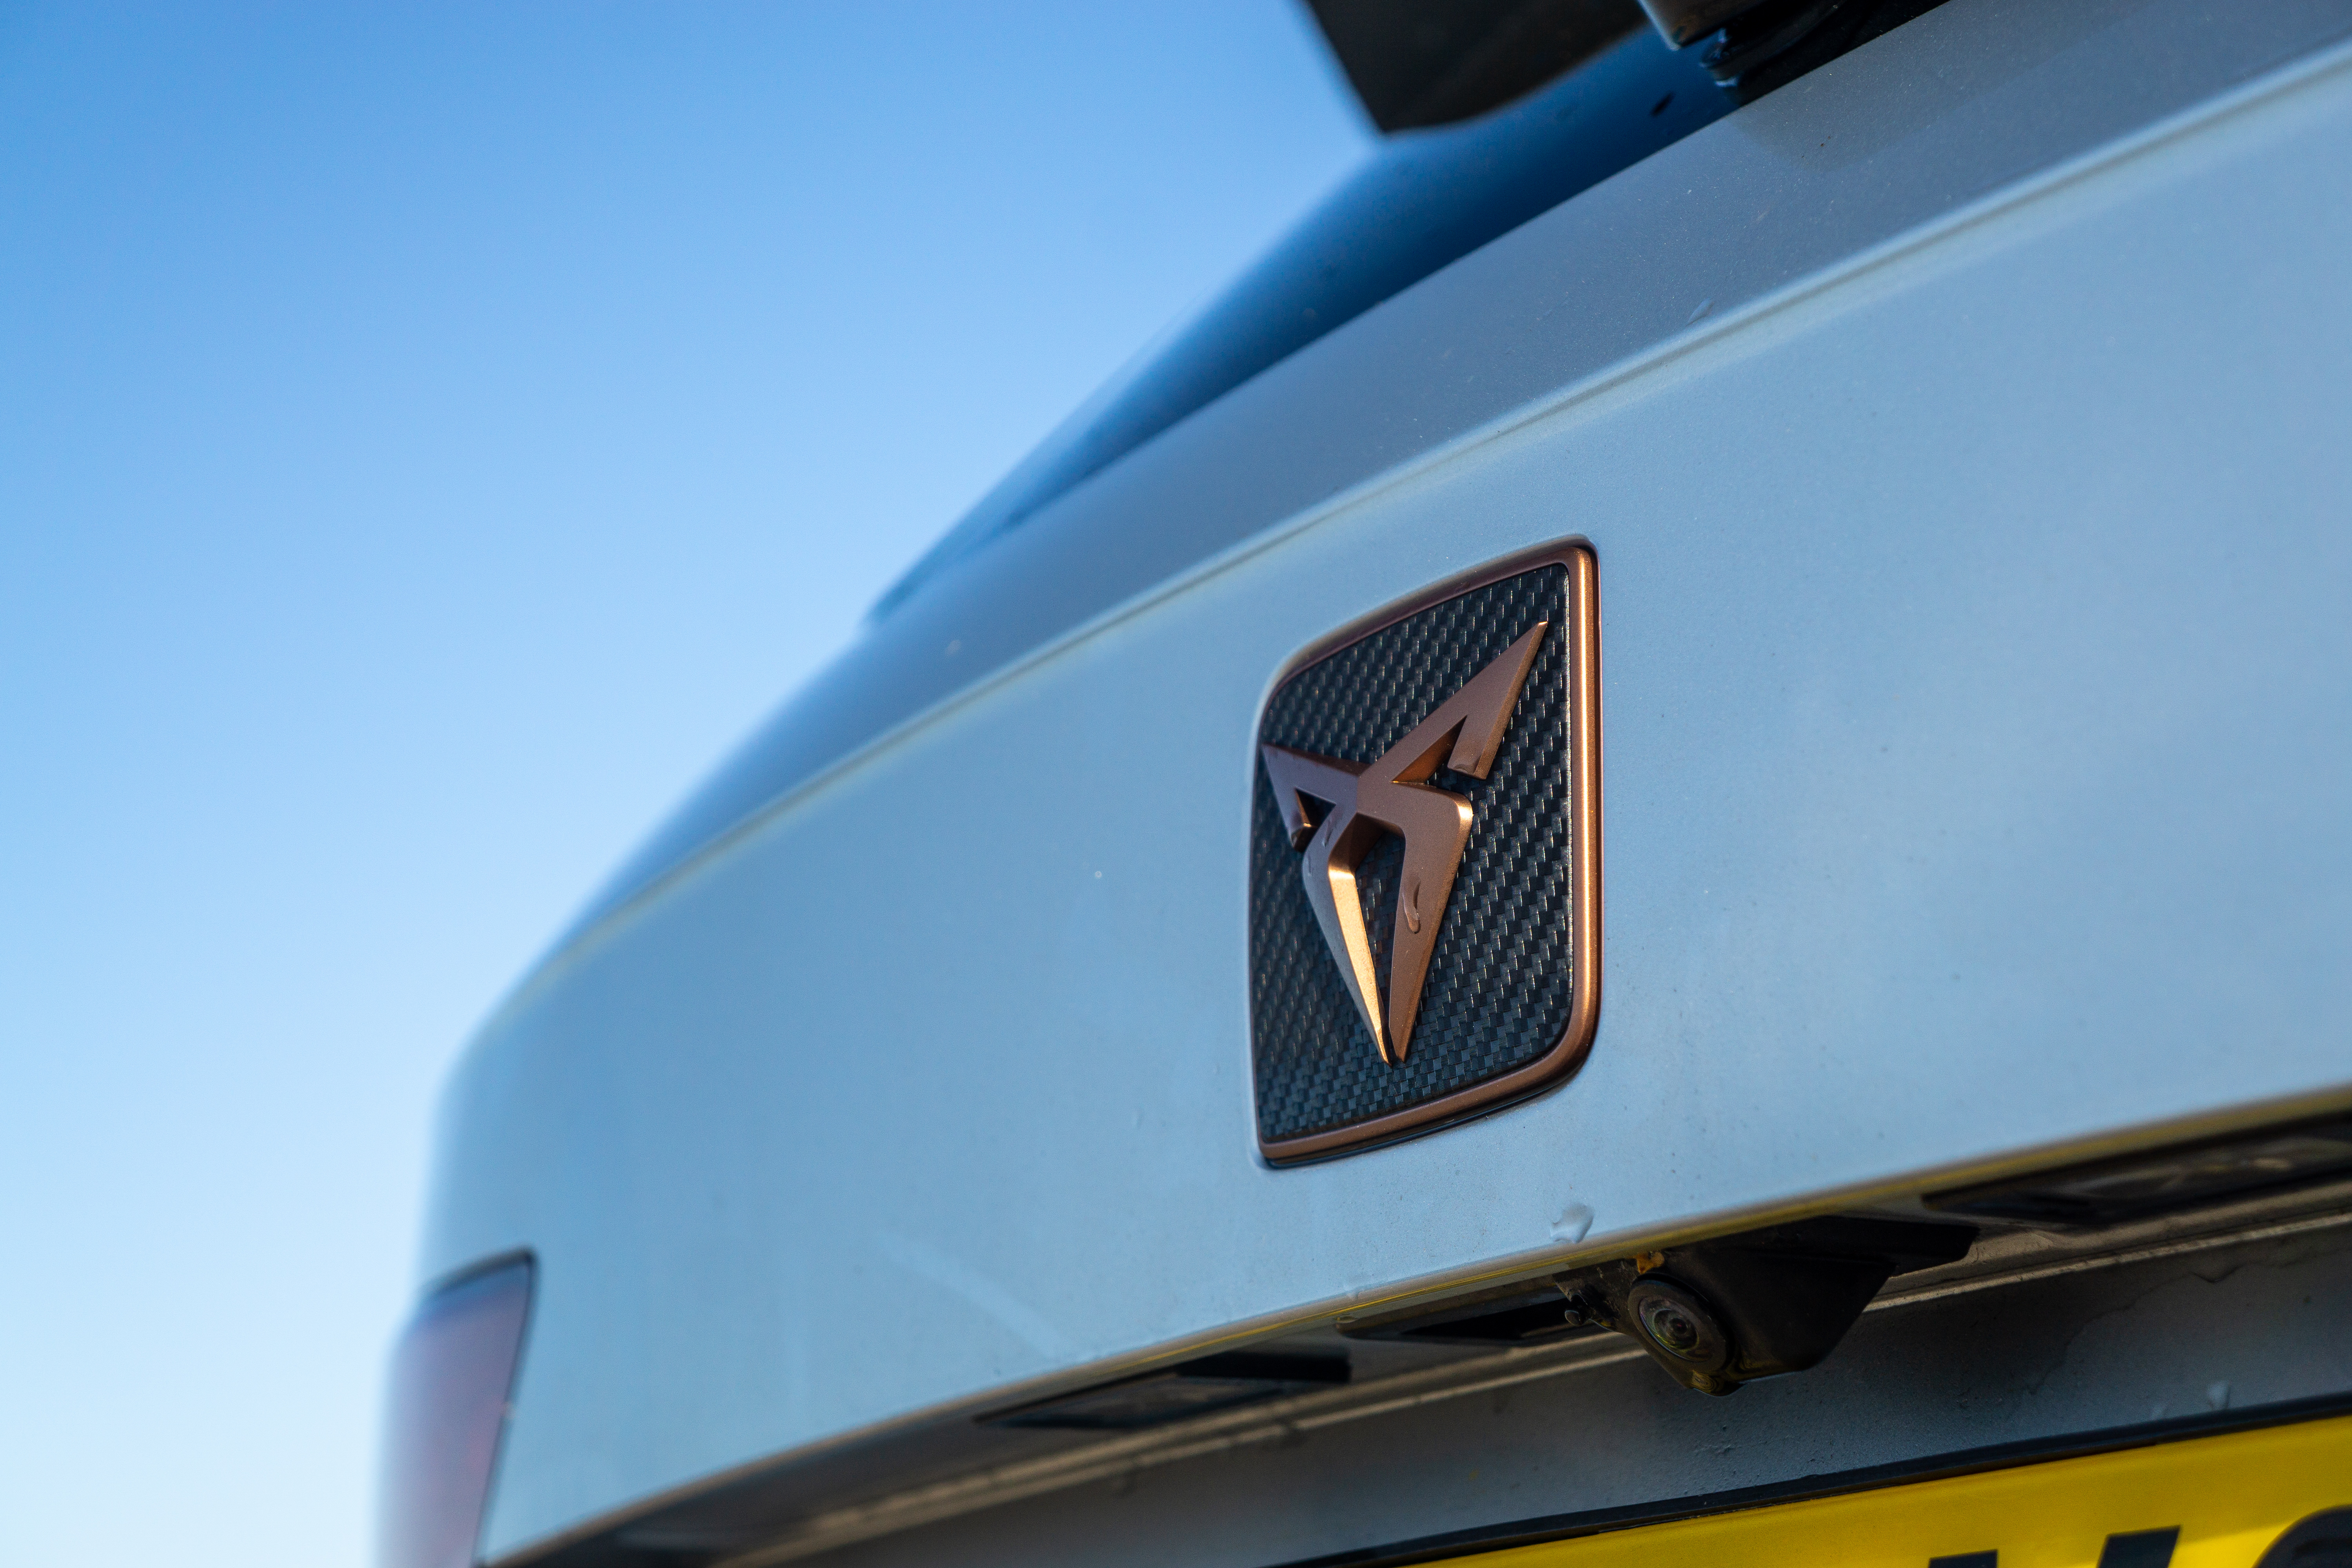 The rear of the car gets Cupra's new logo too